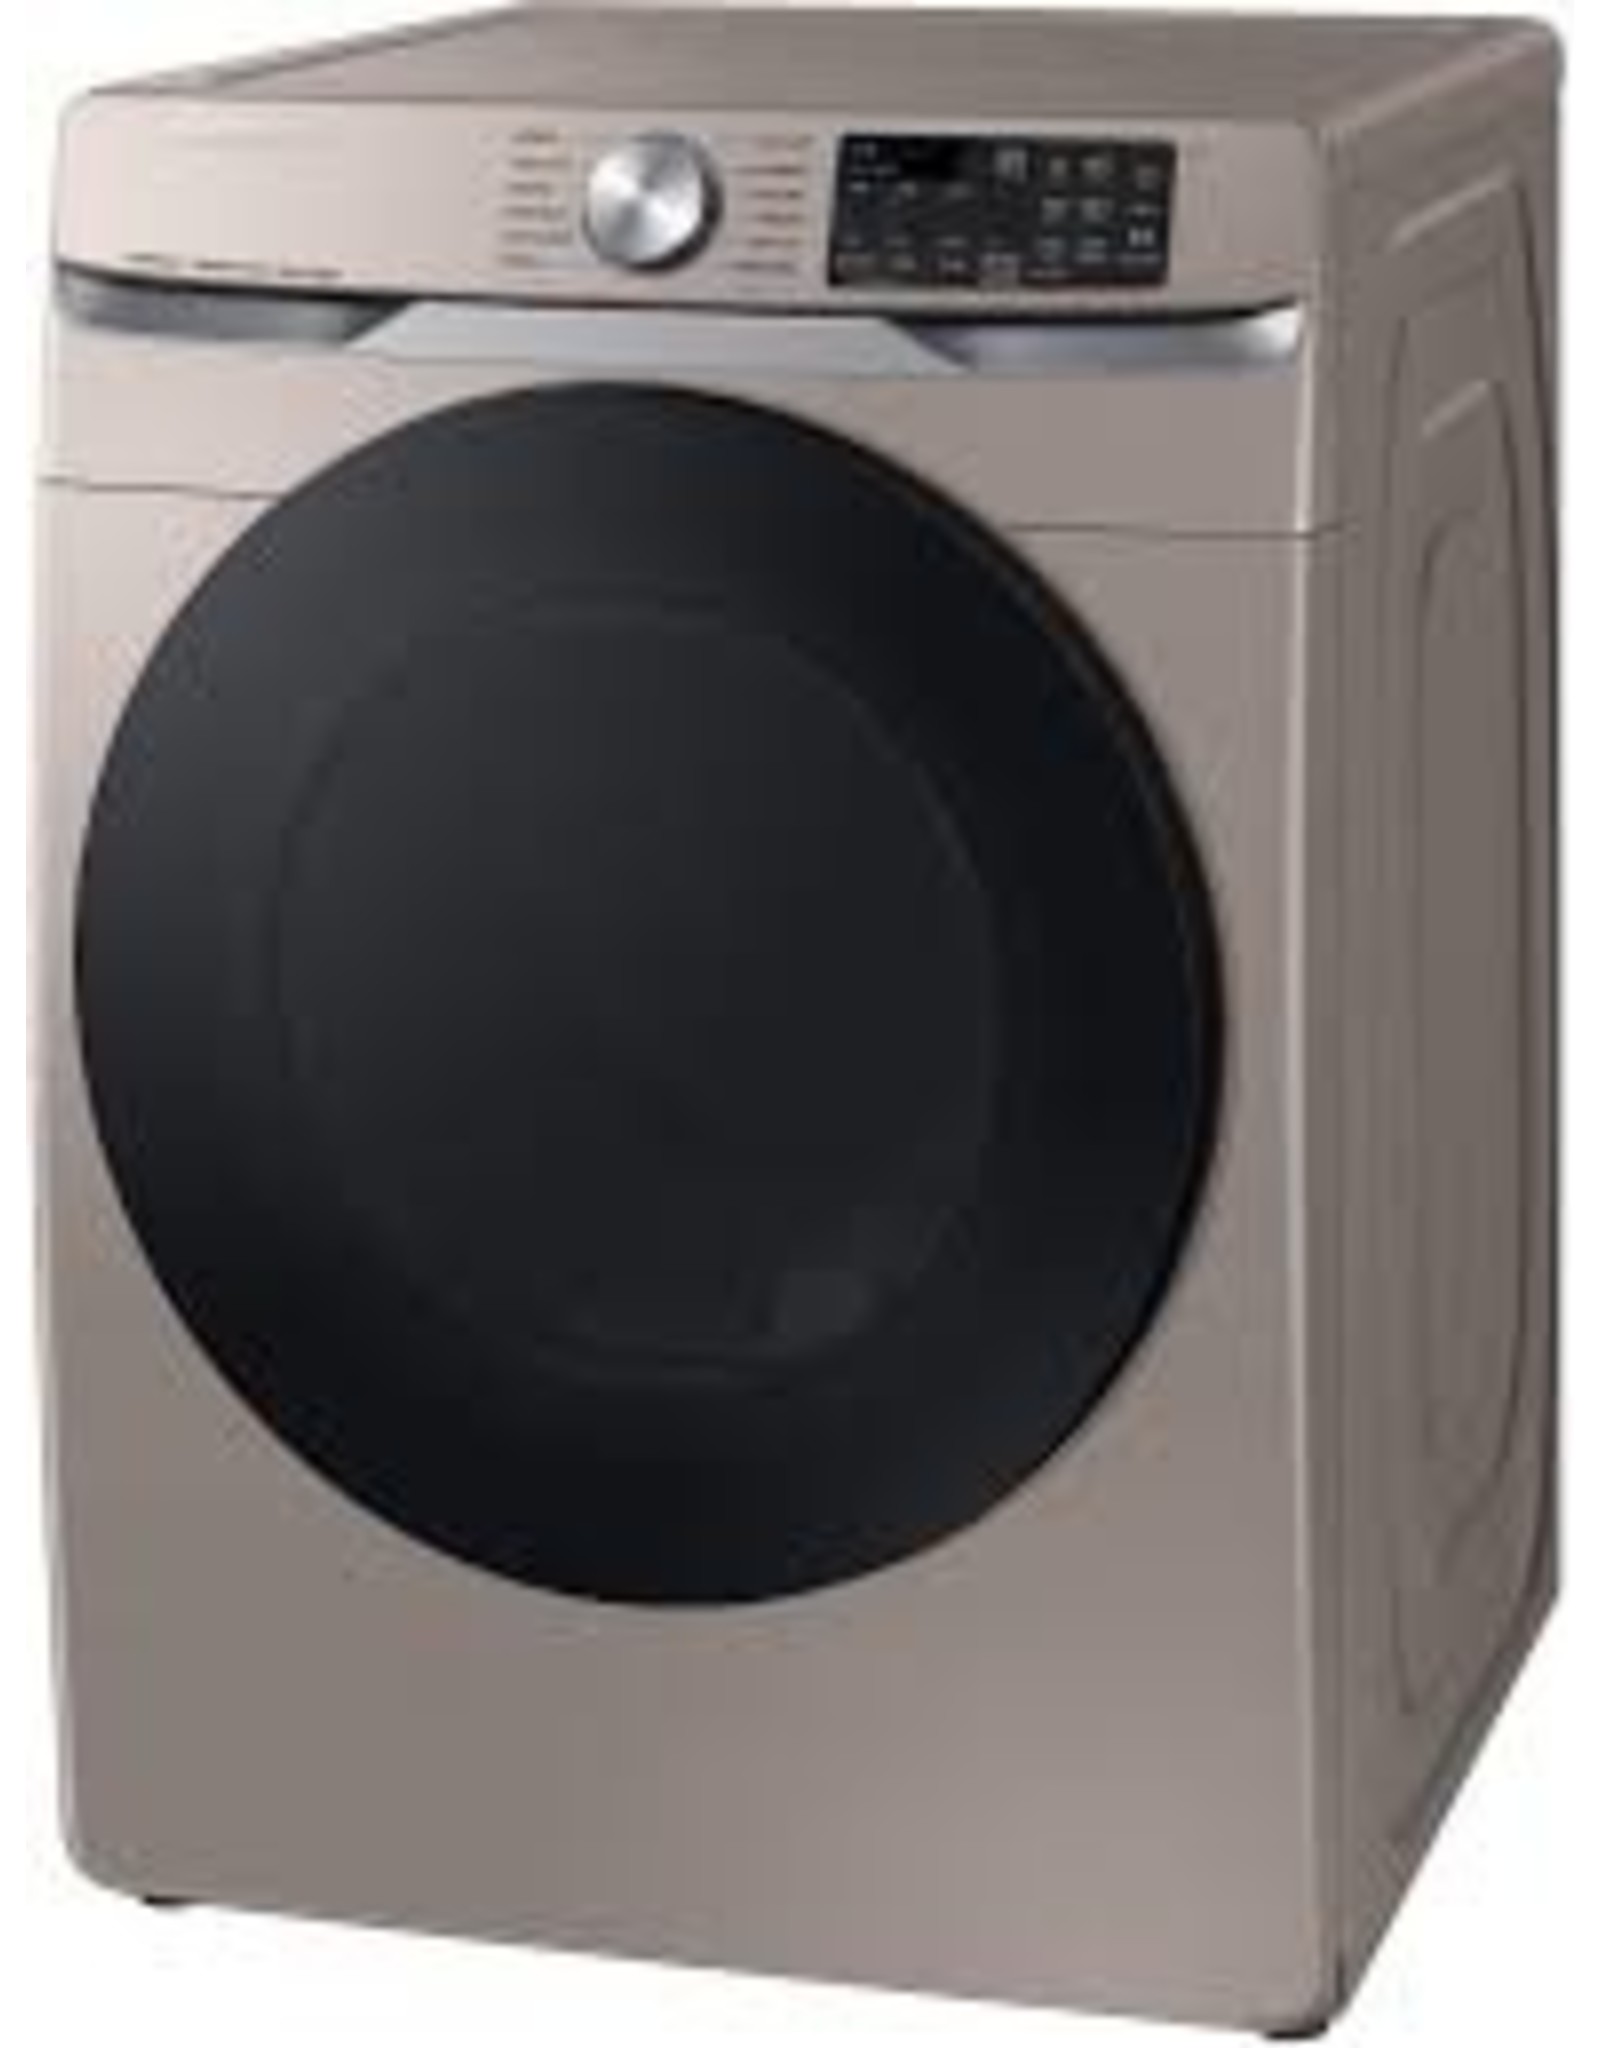 SAMSUNG DVE45B6300C 27 Inch Electric Smart Dryer with 7.5 Cu.Ft. Capacity, Steam Sanitize+, Sensor Dry, Wi-Fi Connectivity, 21 Dry Cycles, 10 Dry Options, 5 Temperature Settings, Interior Drum Light, Reversible Door, Lint Filter Indicator, 4 Way Venting, and ADA